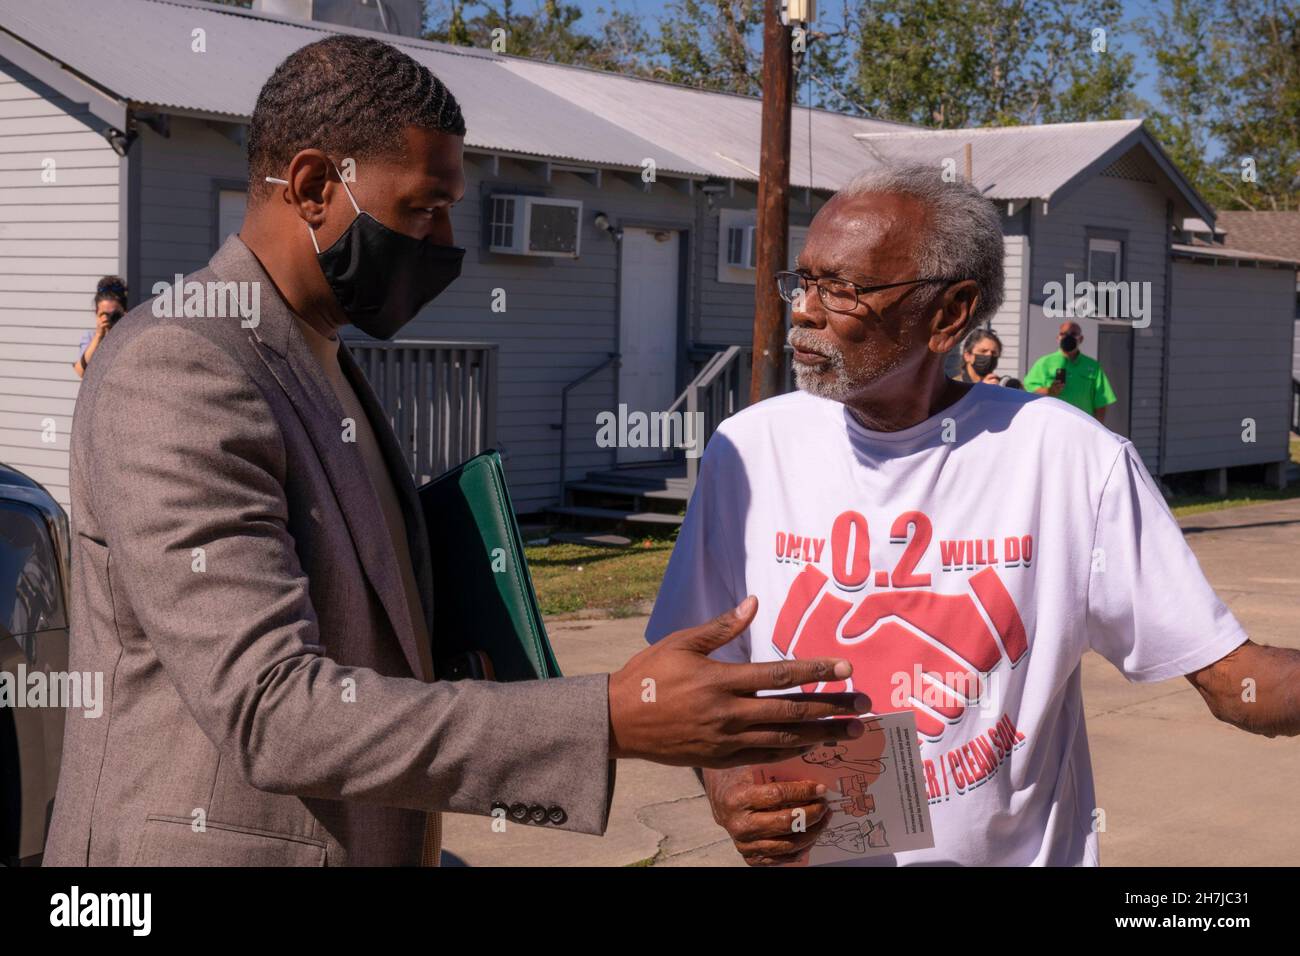 New Orleans, United States of America. 16 November, 2021. U.S. EPA Administrator Michael Regan, left, speaks with St. John the Baptist resident Robert Taylor during a tour of neighborhoods effected by high levels of industrial pollution known as Cancer Alley, during his Journey to Justice tour November 16, 2021 in New Orleans, Louisiana.  Credit: Eric Vance/U.S. EPA/Alamy Live News Stock Photo